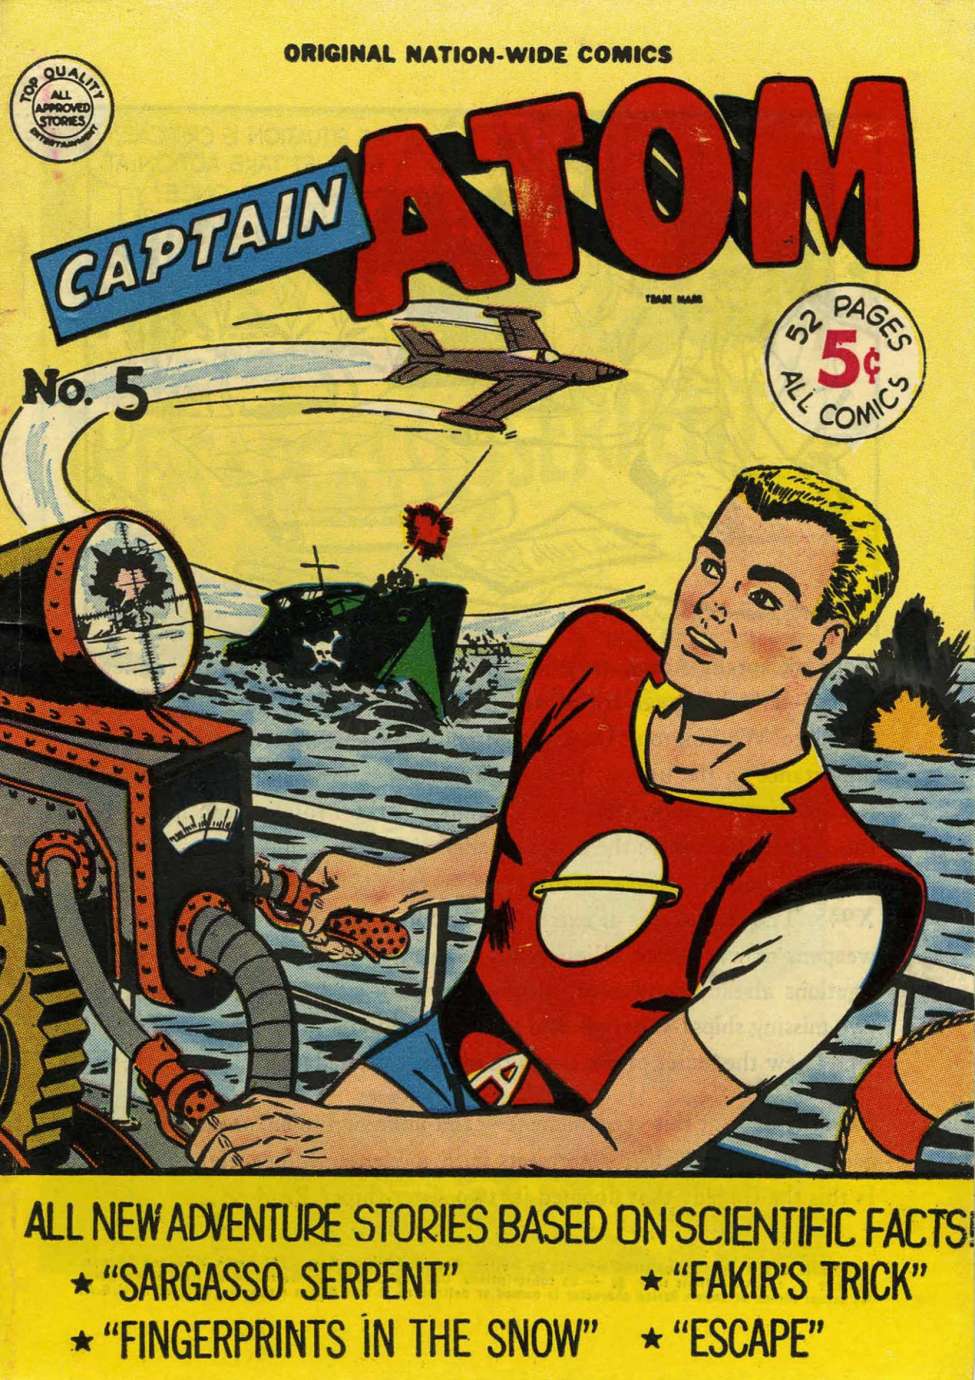 Book Cover For Captain Atom 5 - Version 2